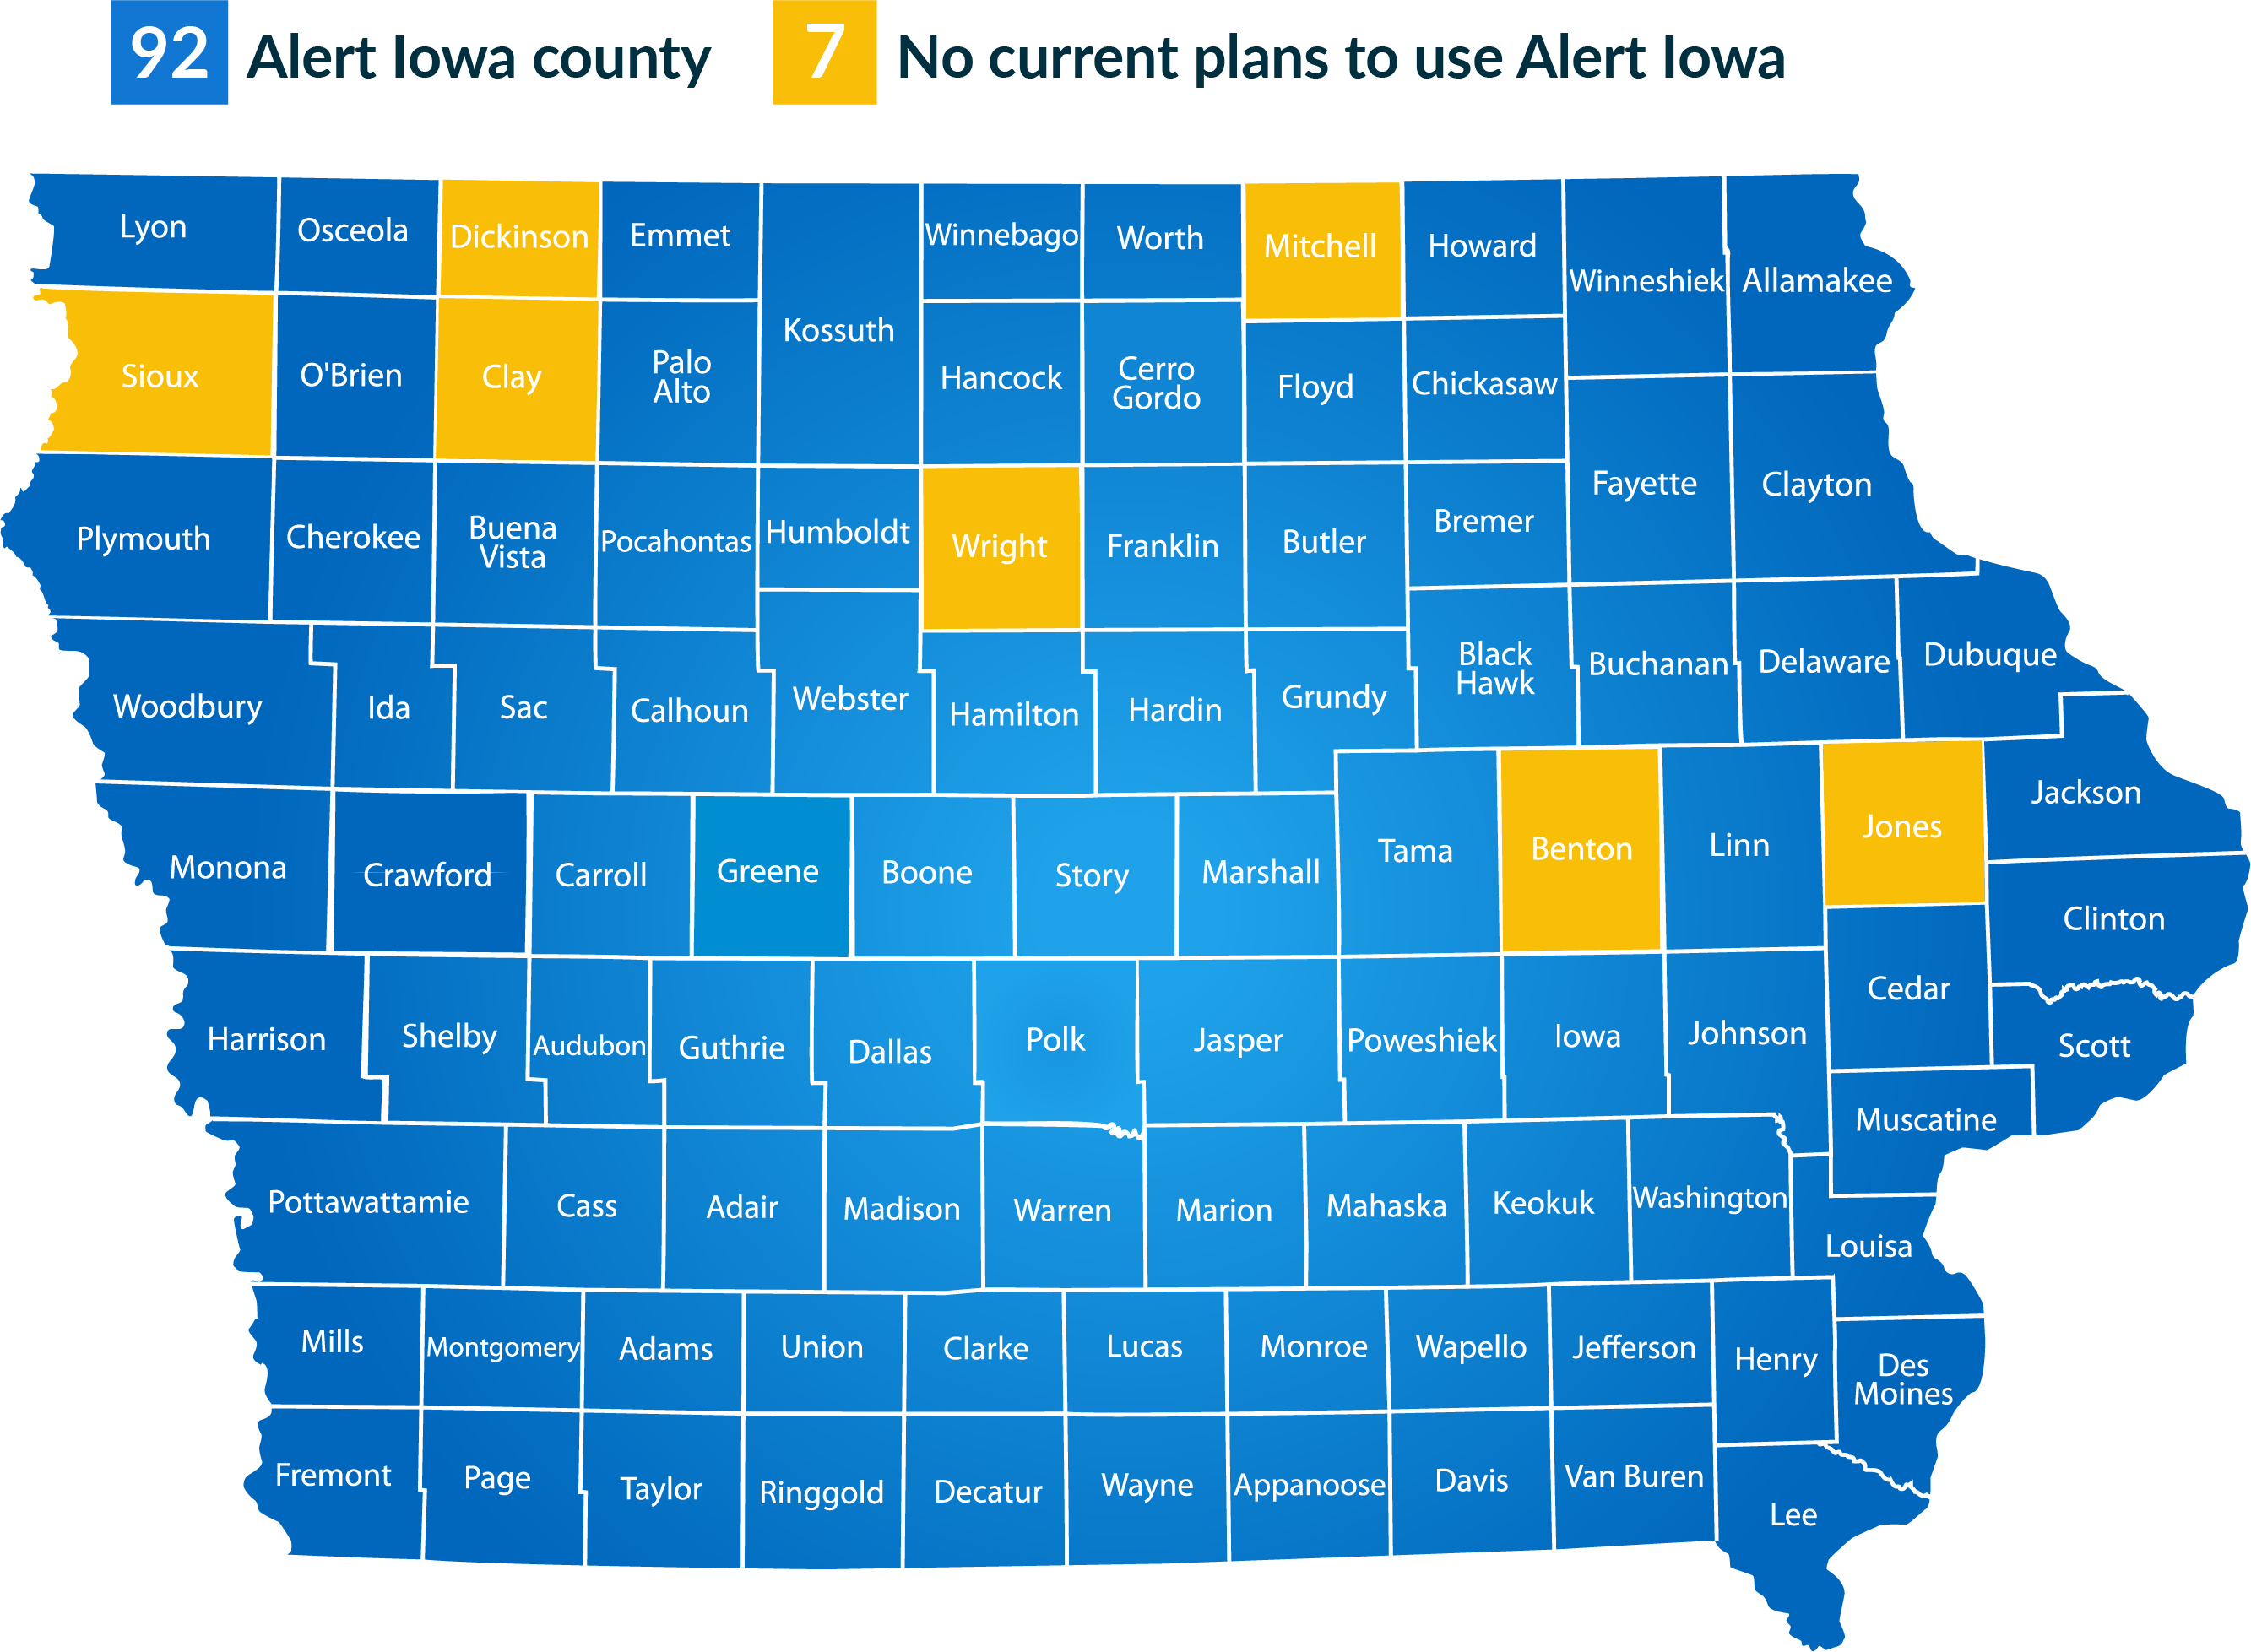 Alert Iowa County Map, 92 Alert Iowa Counties, 7 Counties with no current plans to use Alert Iowa including Sioux, Dickinson, Clay, Wright, Mitchell, Benton and Jones